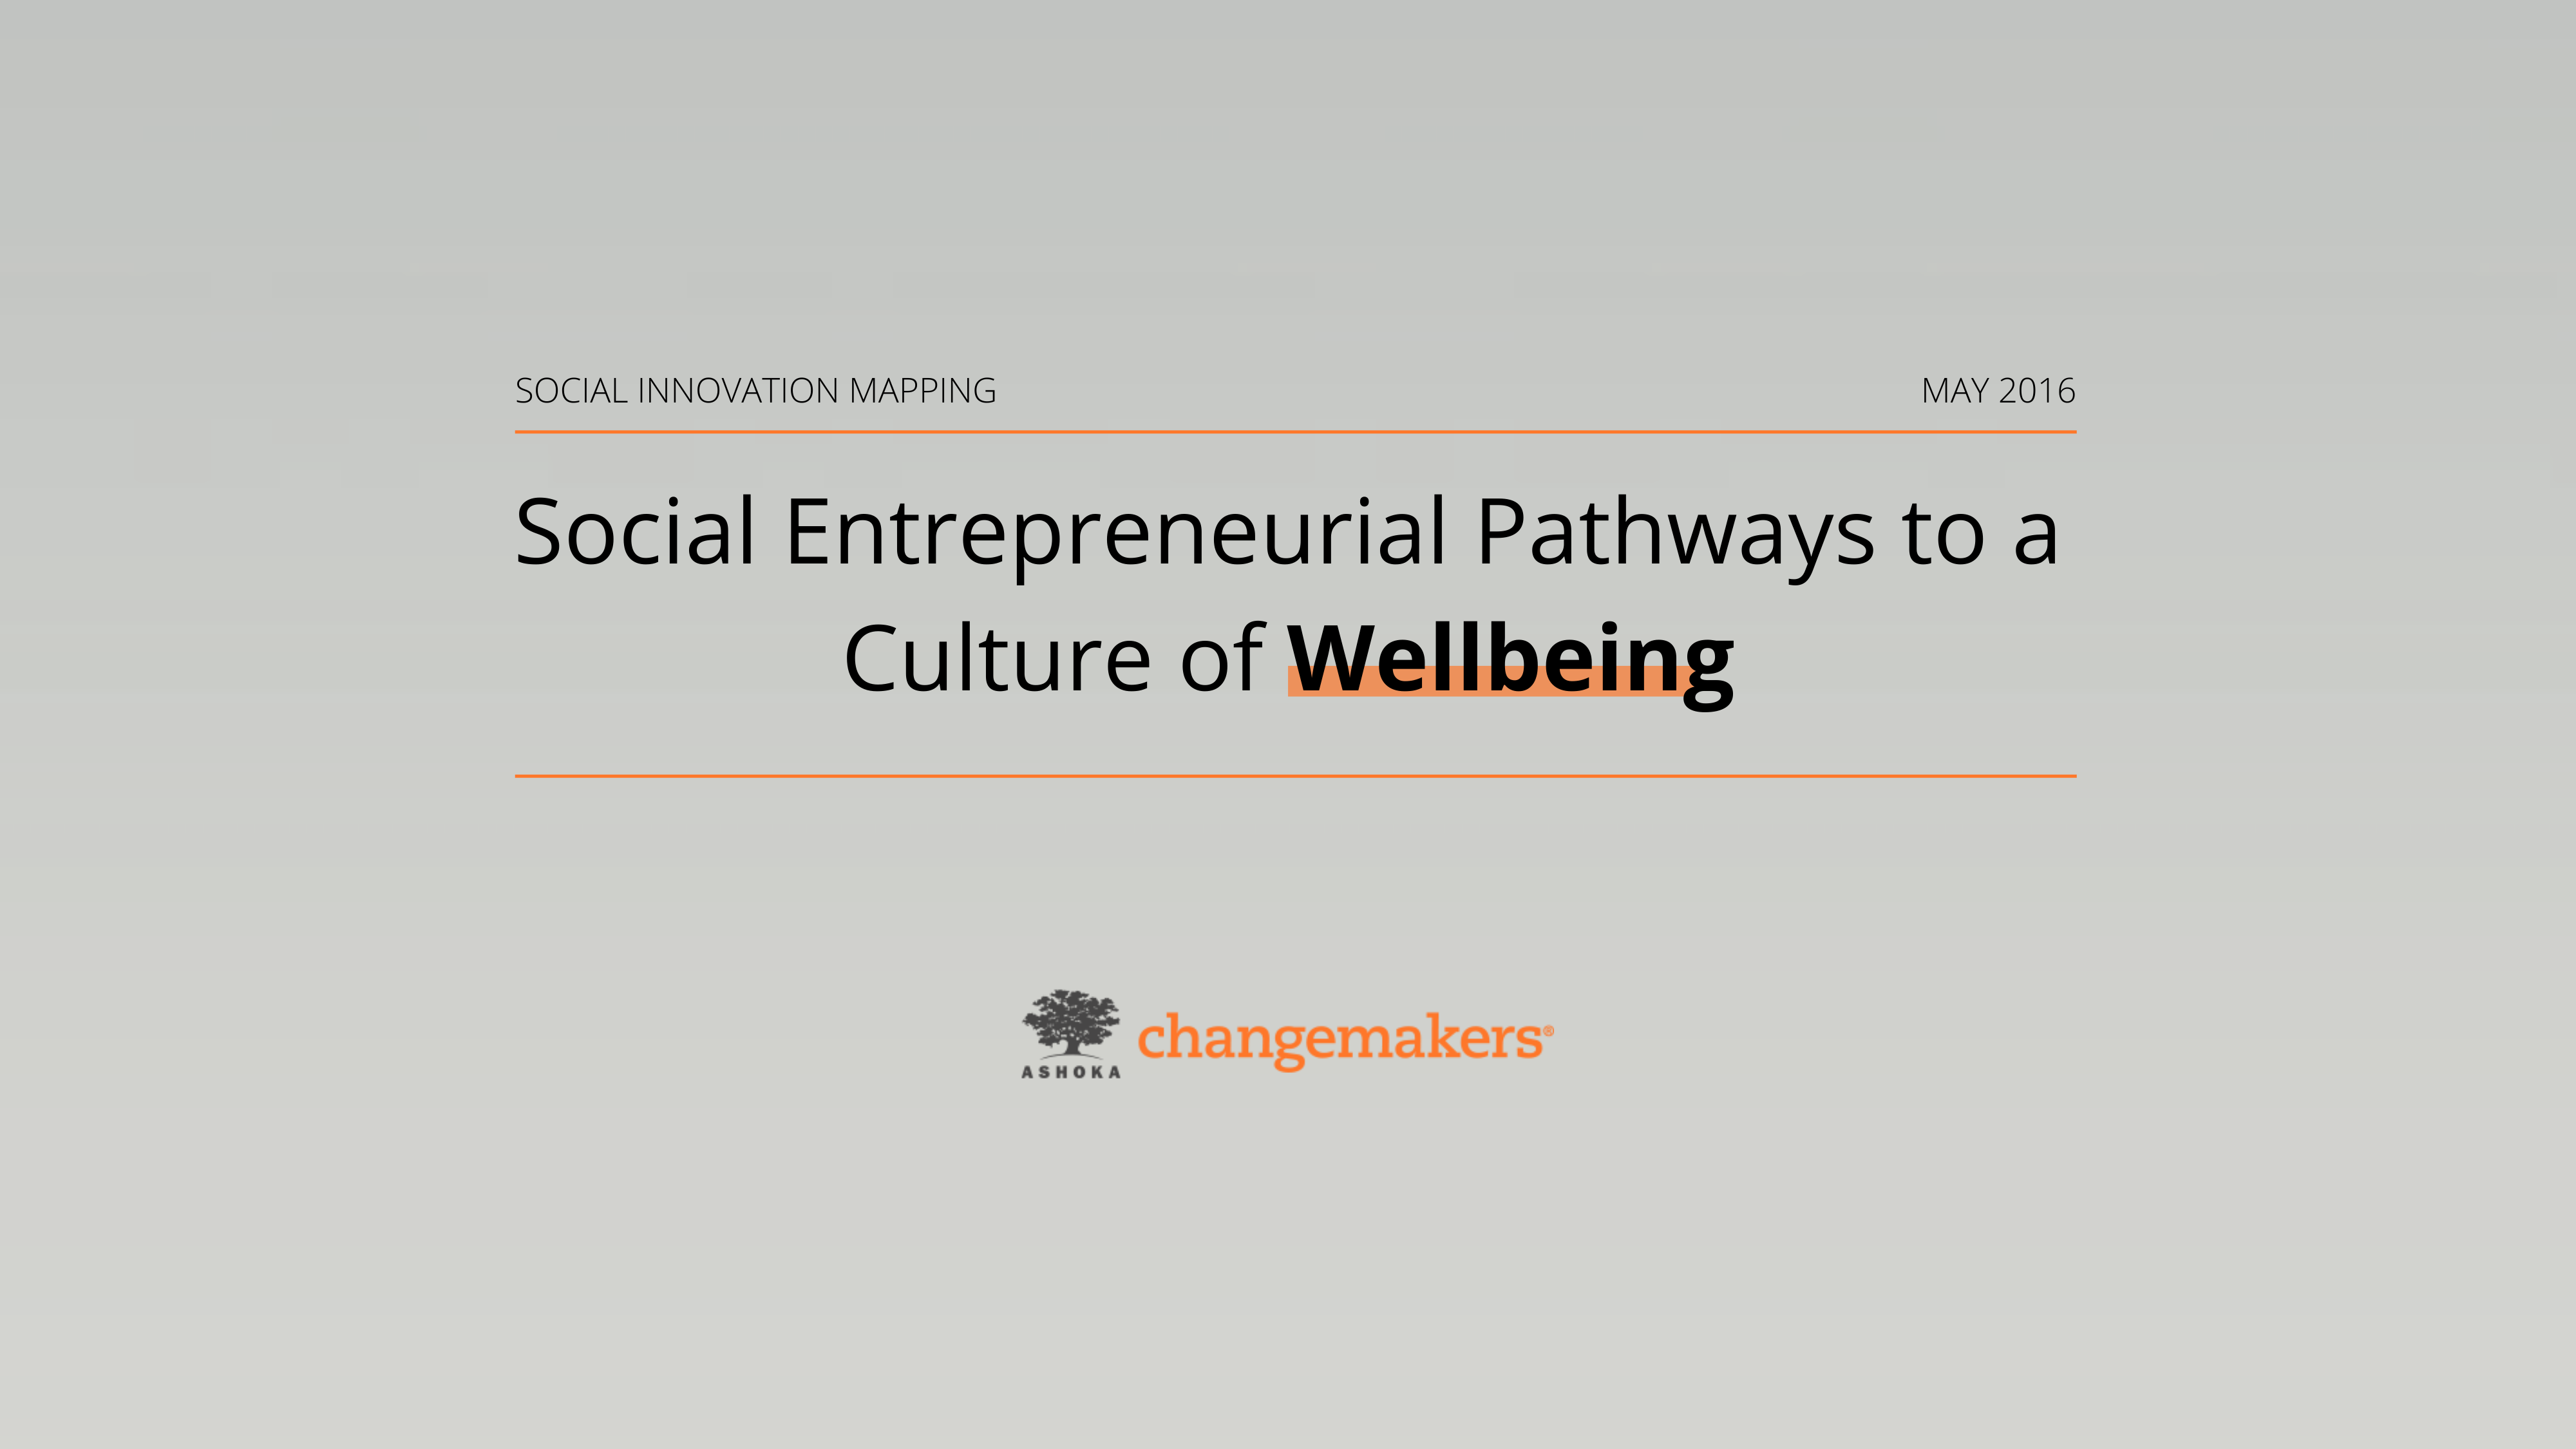 Social Entrepreneurial Pathways to a Culture of Wellbeing